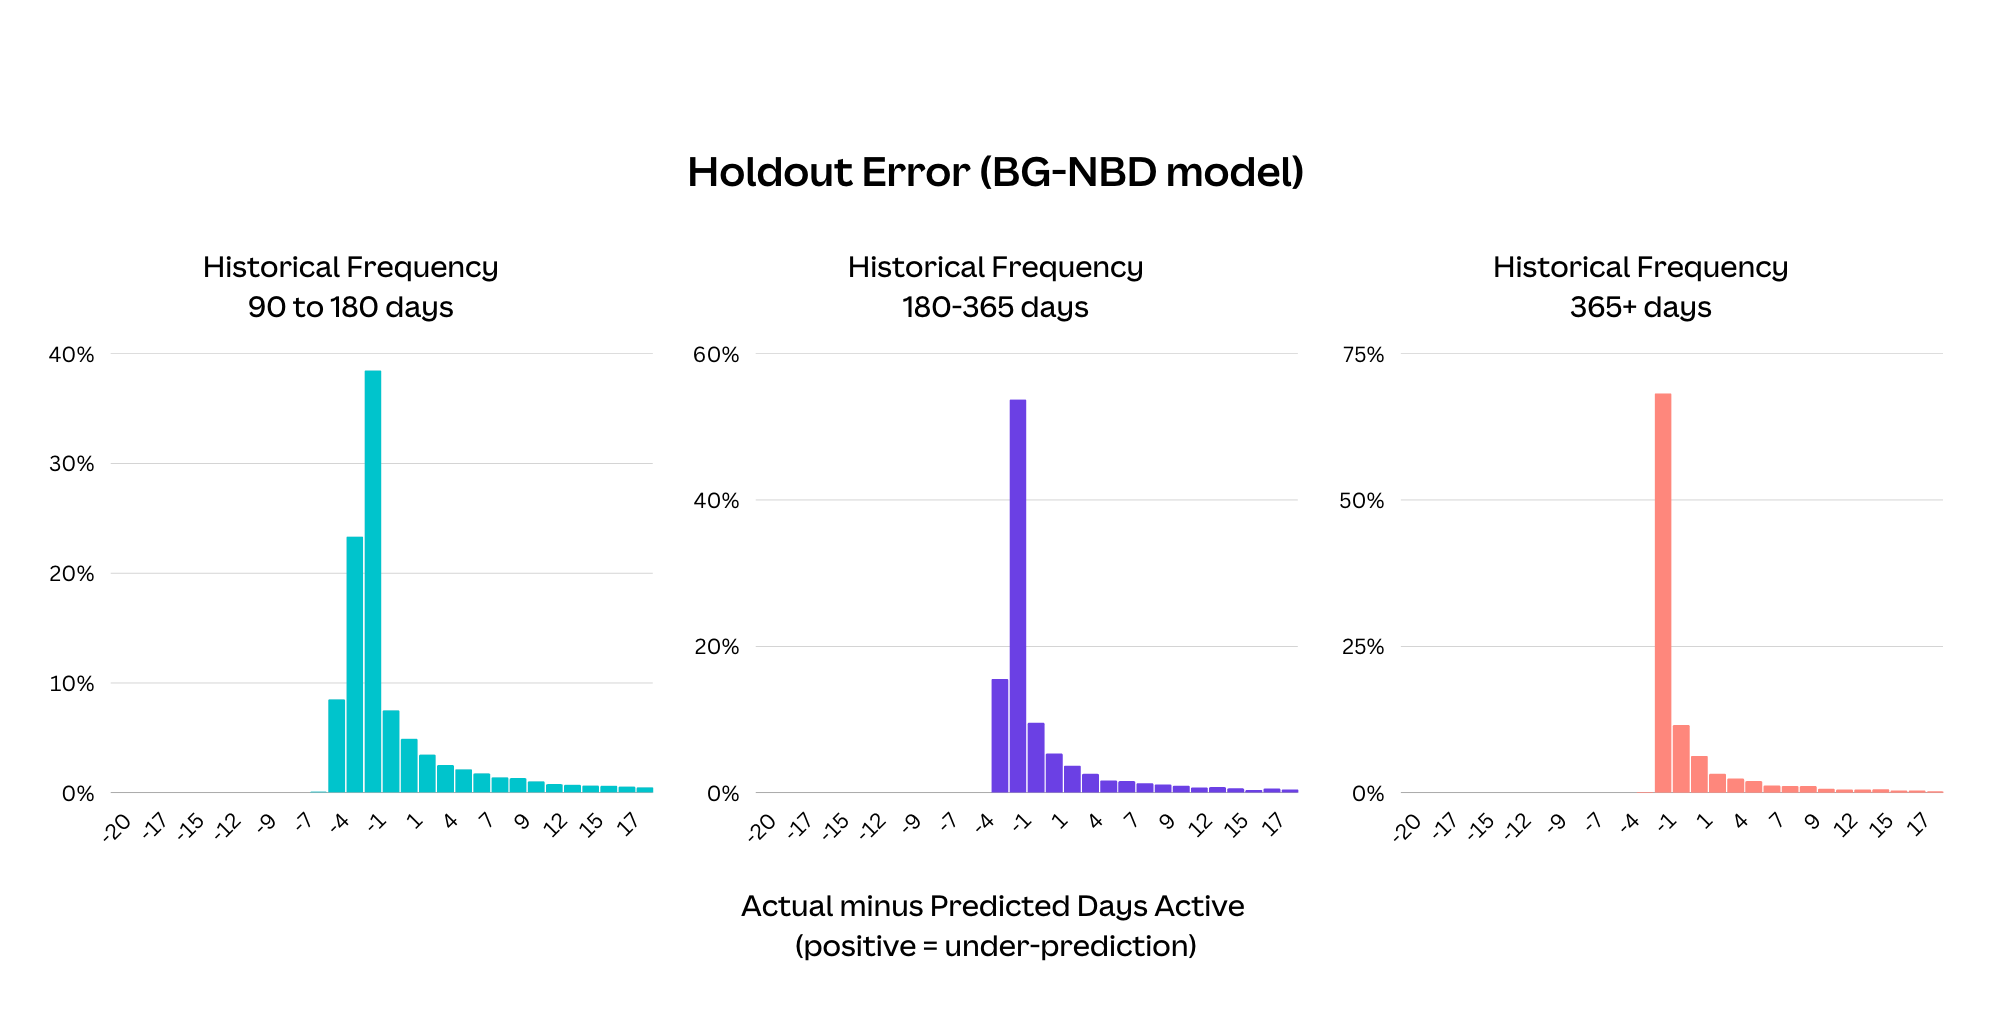 Holdout error distribution plots for the BG-NBD model. For users with a historical frequency of over 90 days, the plots are skewed to the right, indicating the model underestimates future activity.